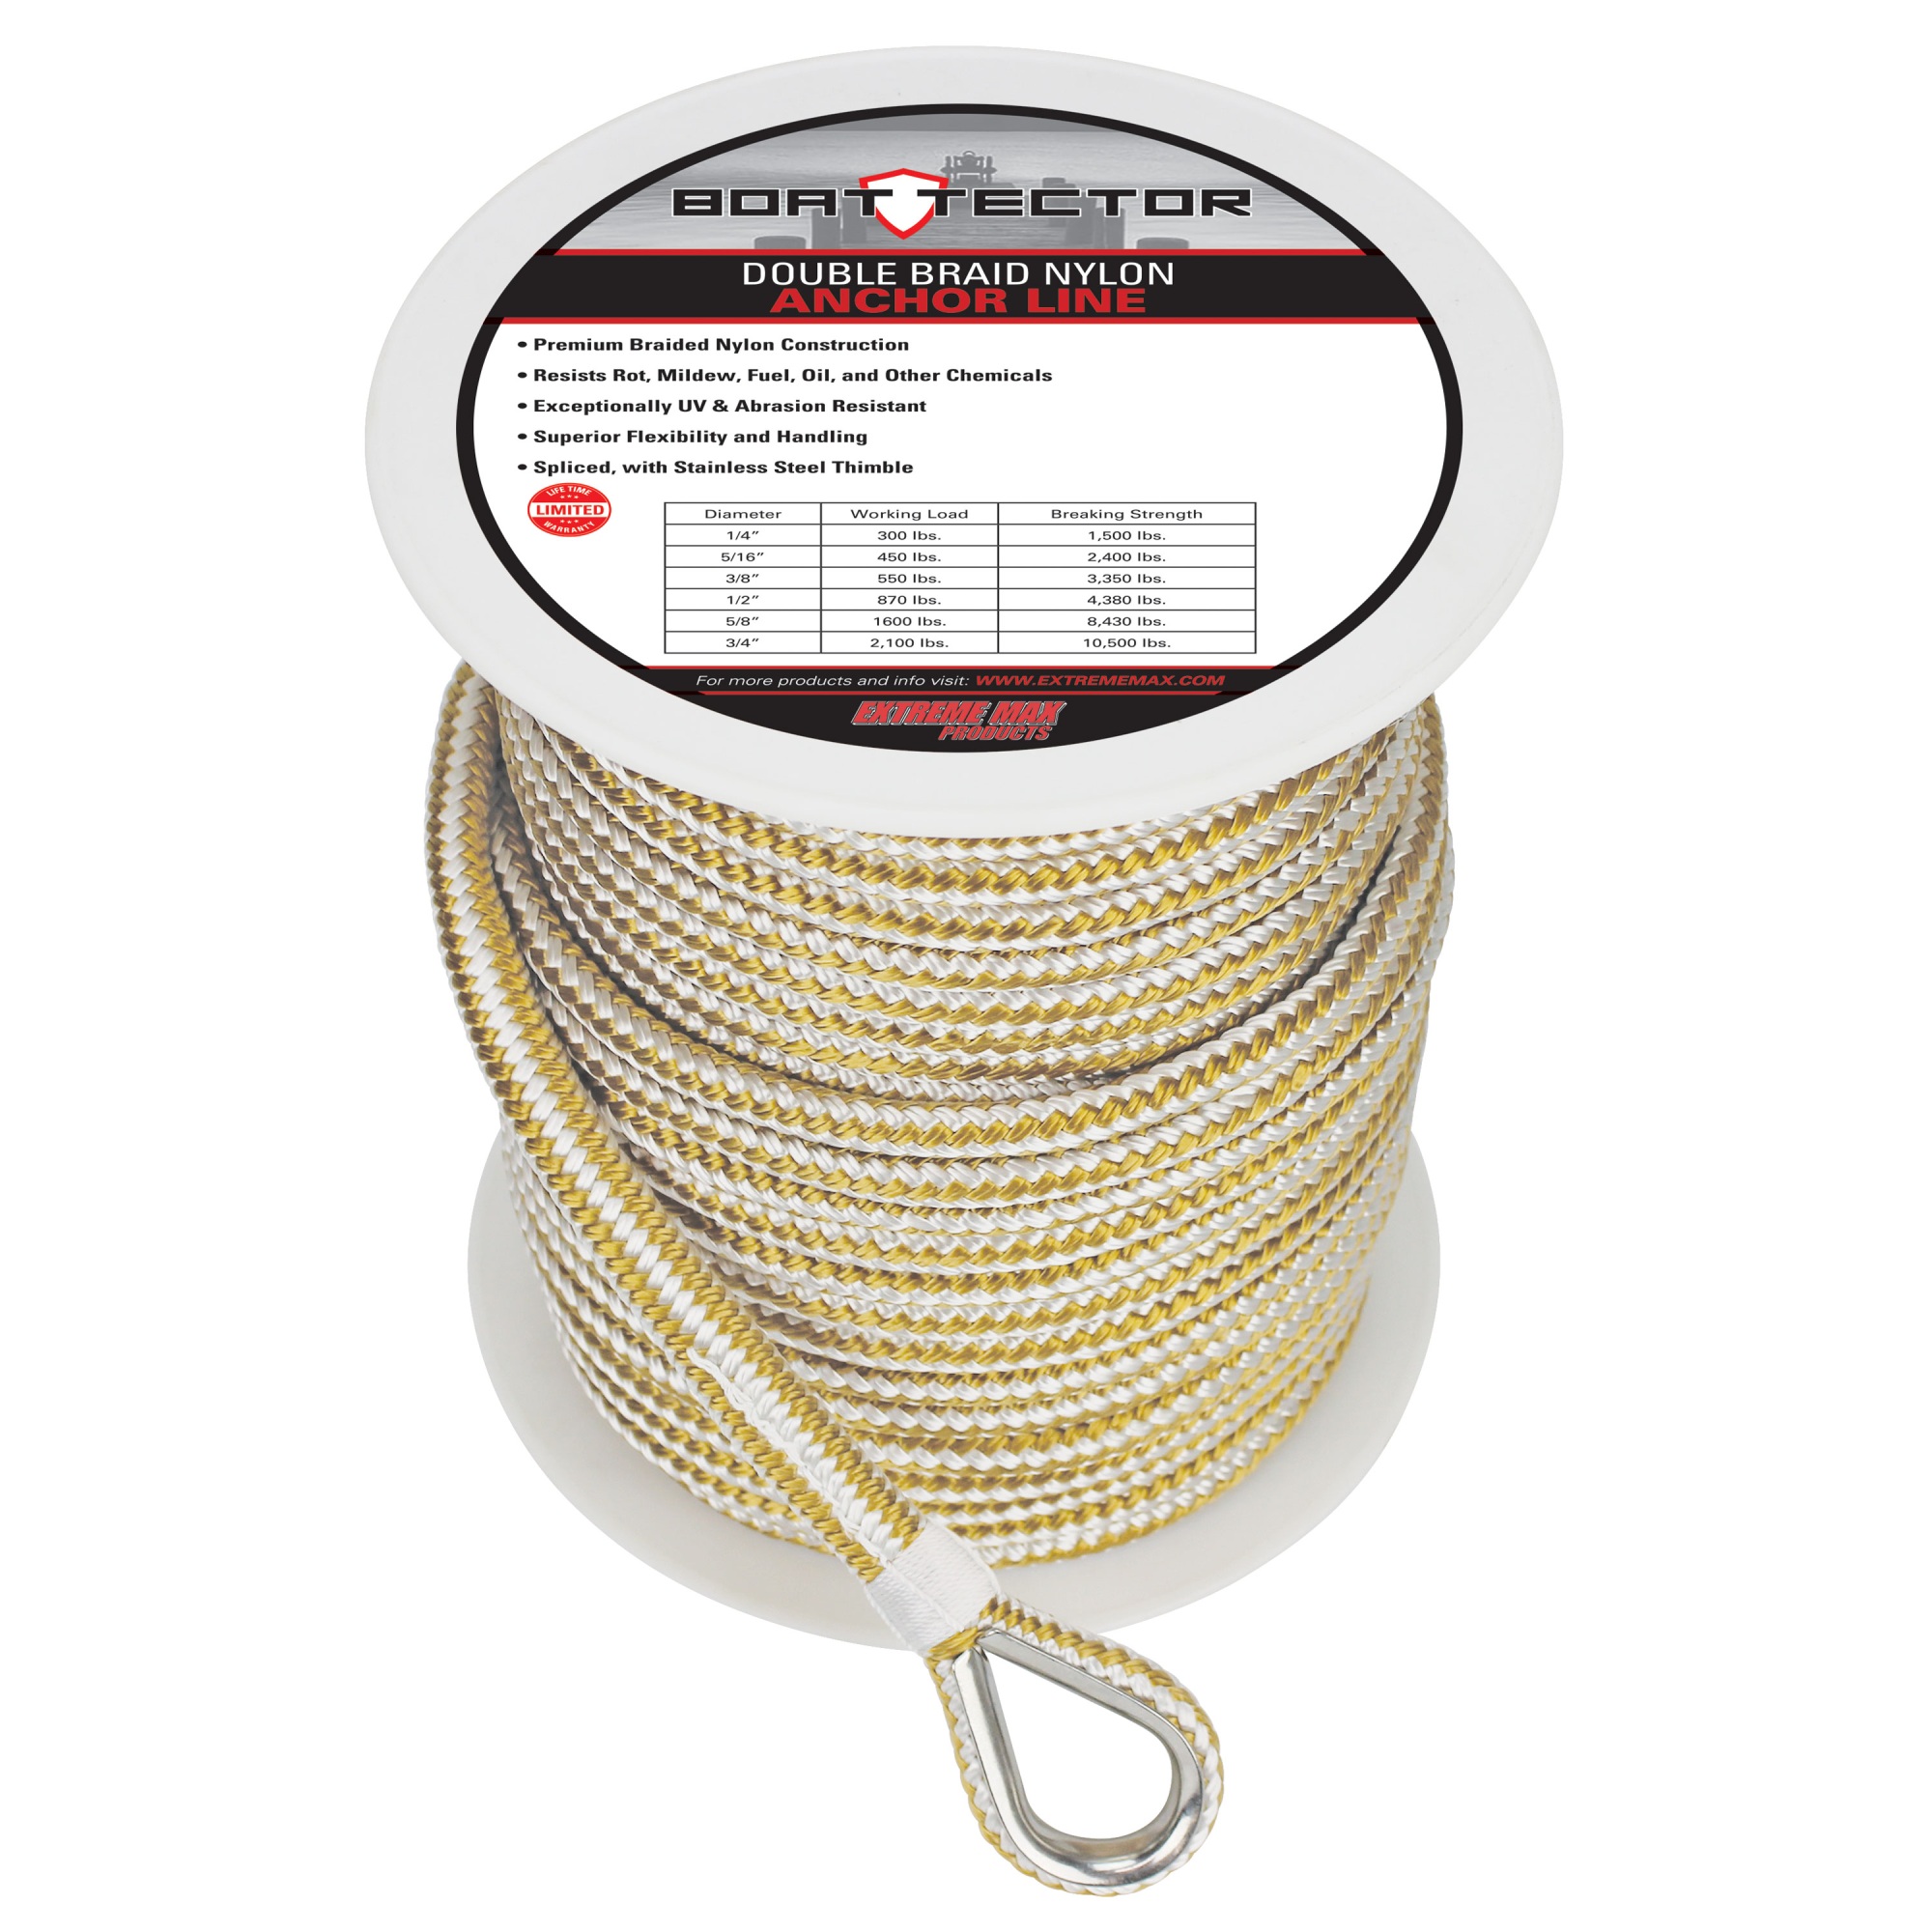 Extreme Max 3-8X200 W-G W-THIMBLE 0.37 in.x 200 ft. BoatTector Double Braid Nylon Anchor Line with Thimble